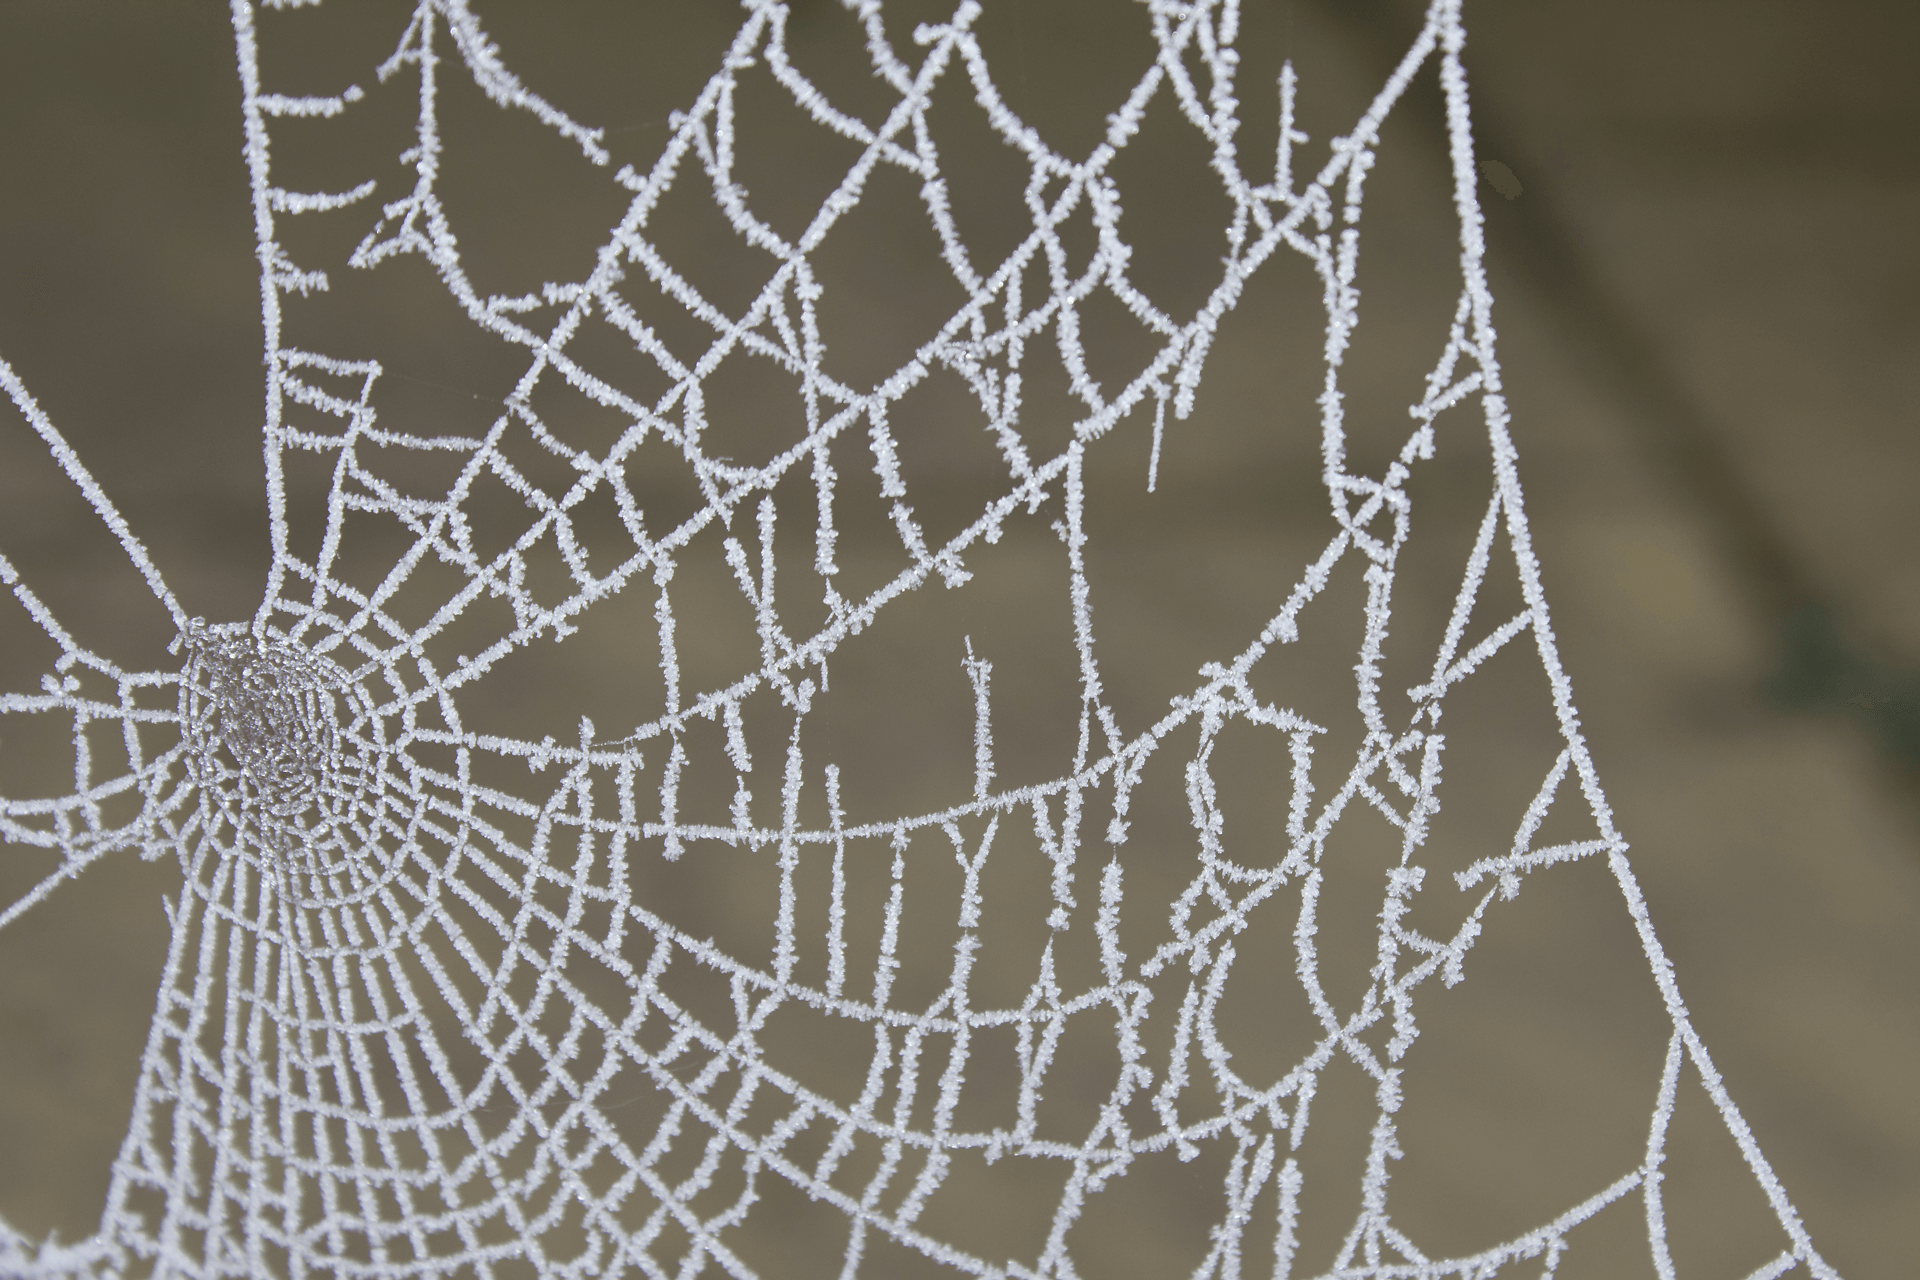 Spider Web In The Frost